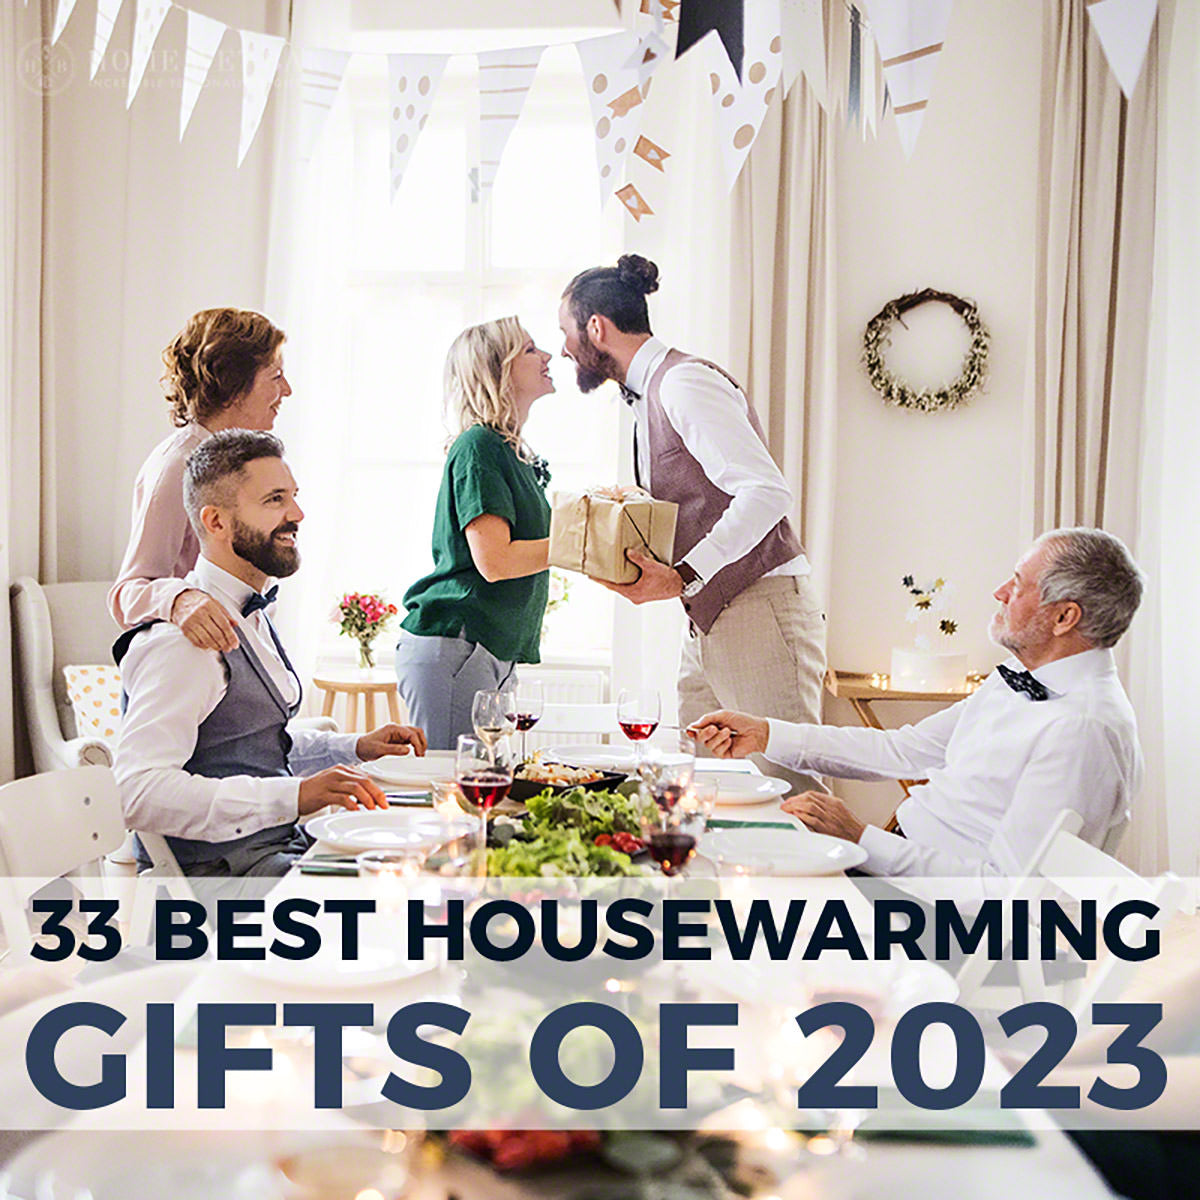 55 Housewarming Gift Ideas that your friends will love 2022